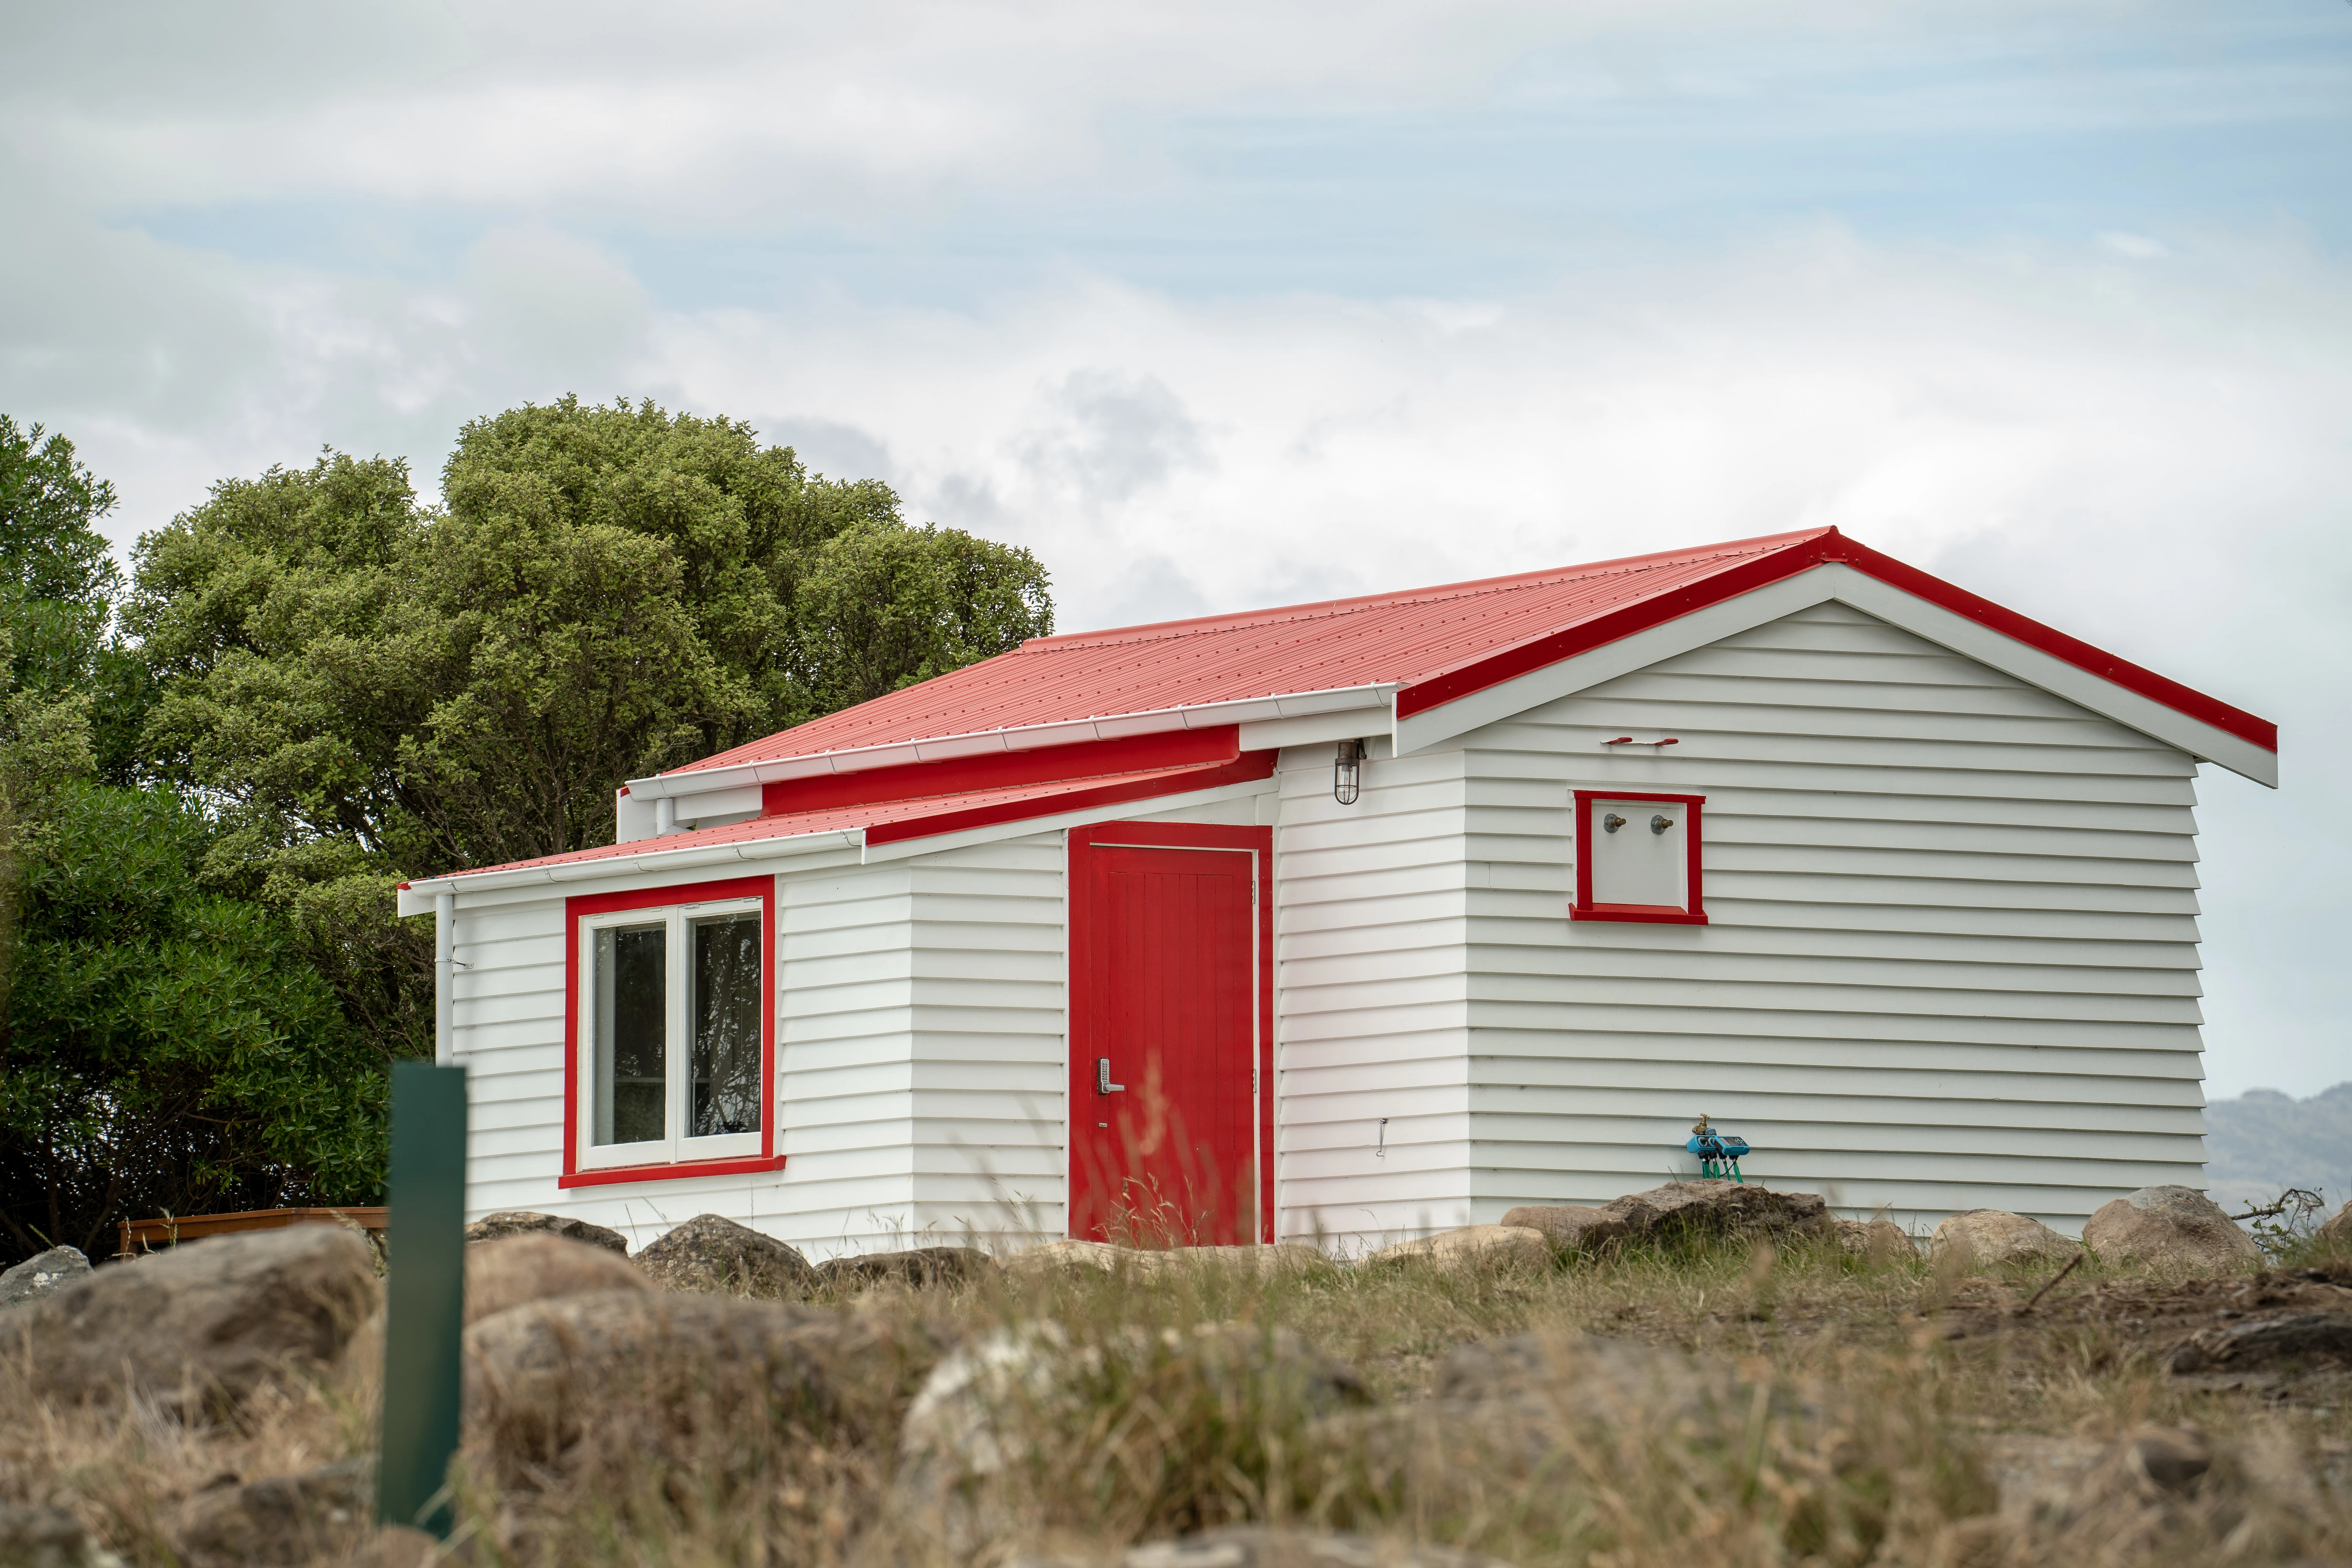 The Lighthouse Cottage is white with red trims and a red roof